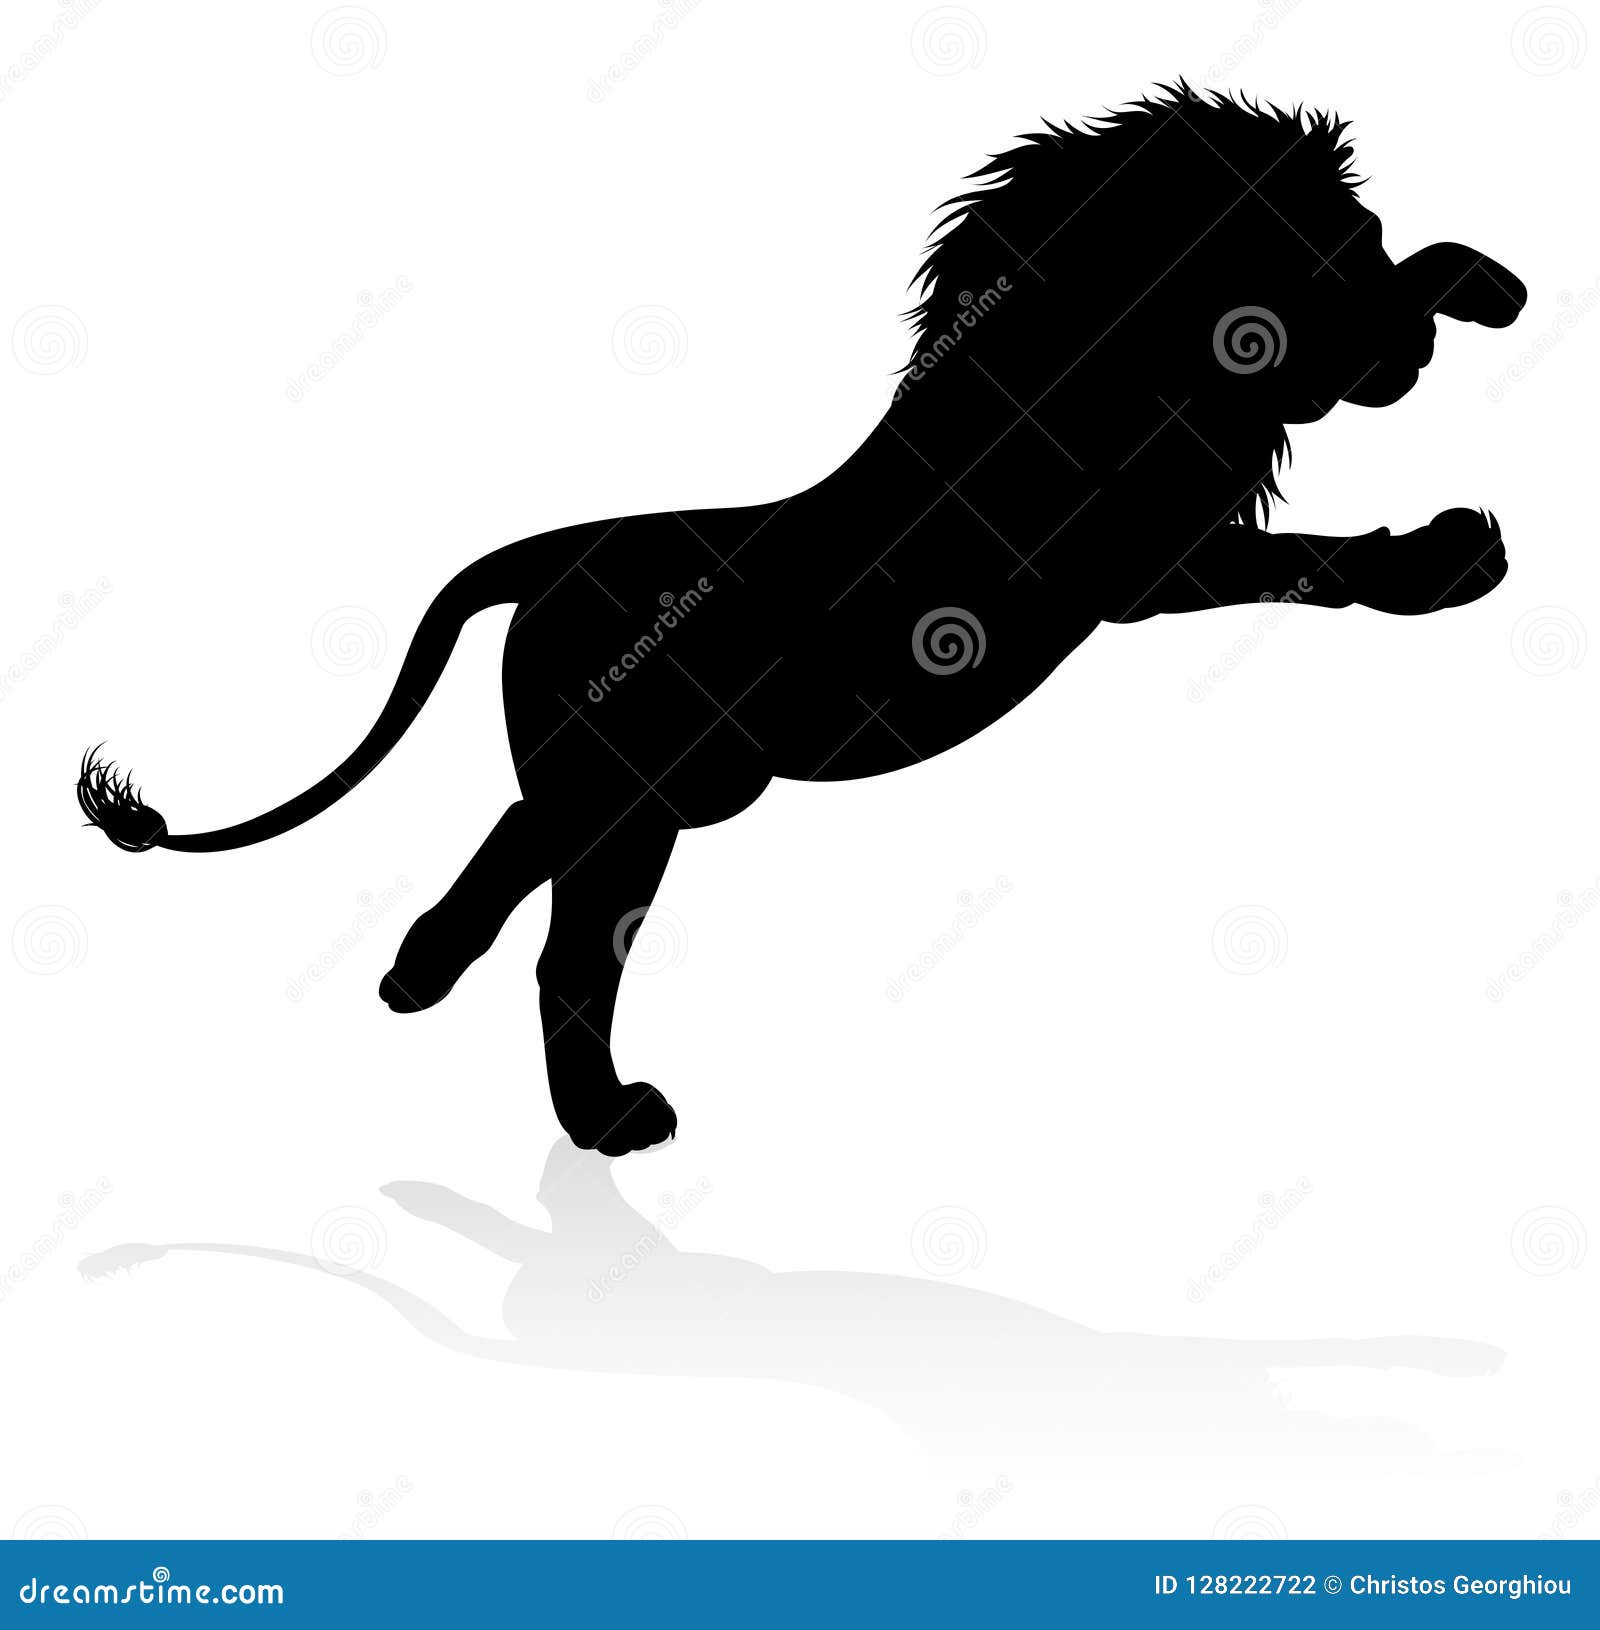 lions silhouette